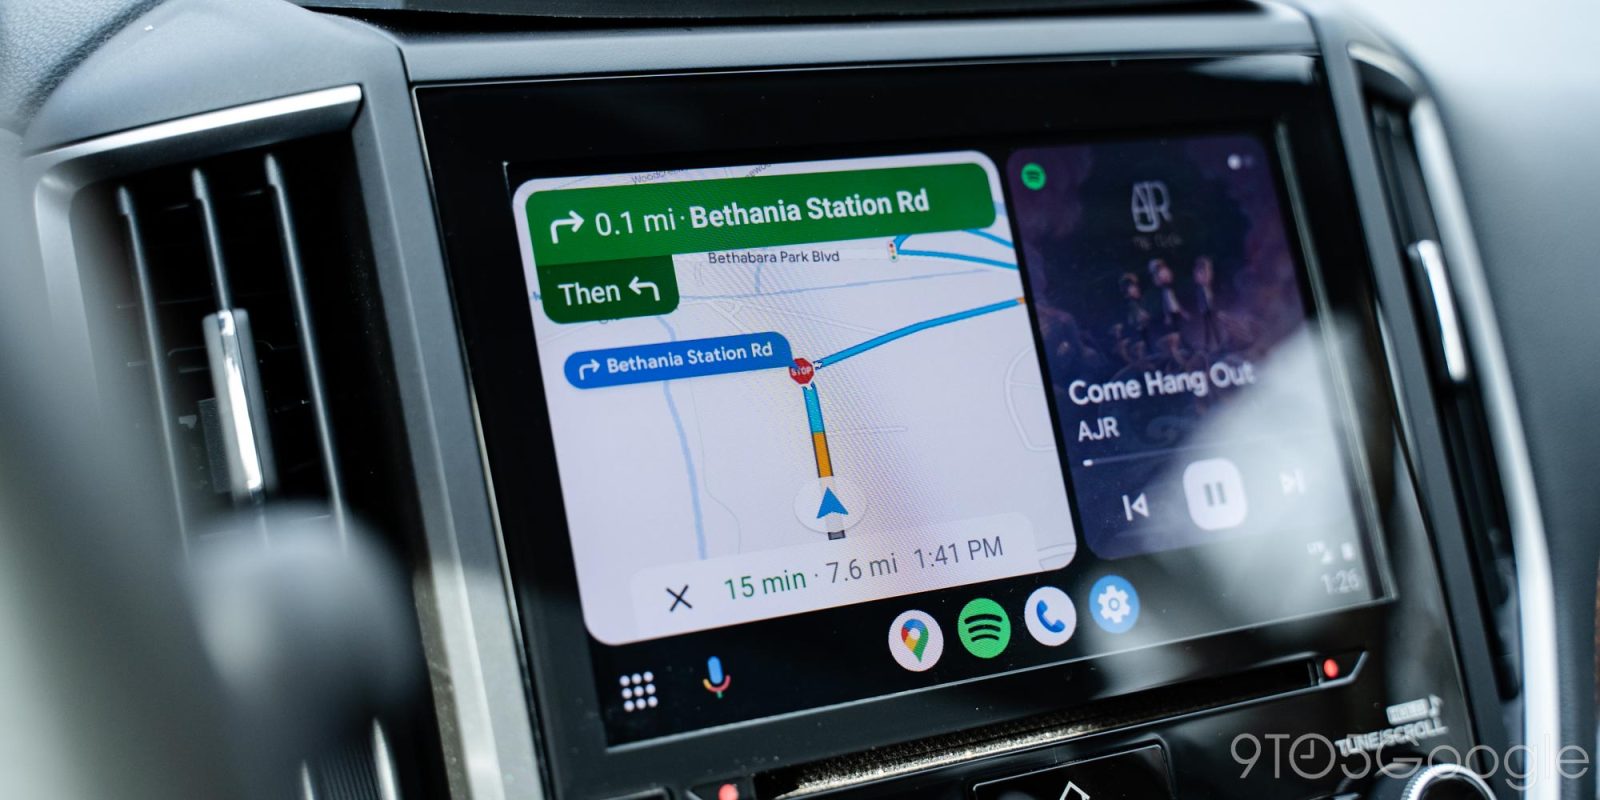 Android Auto is rolling out another new design for Google Maps